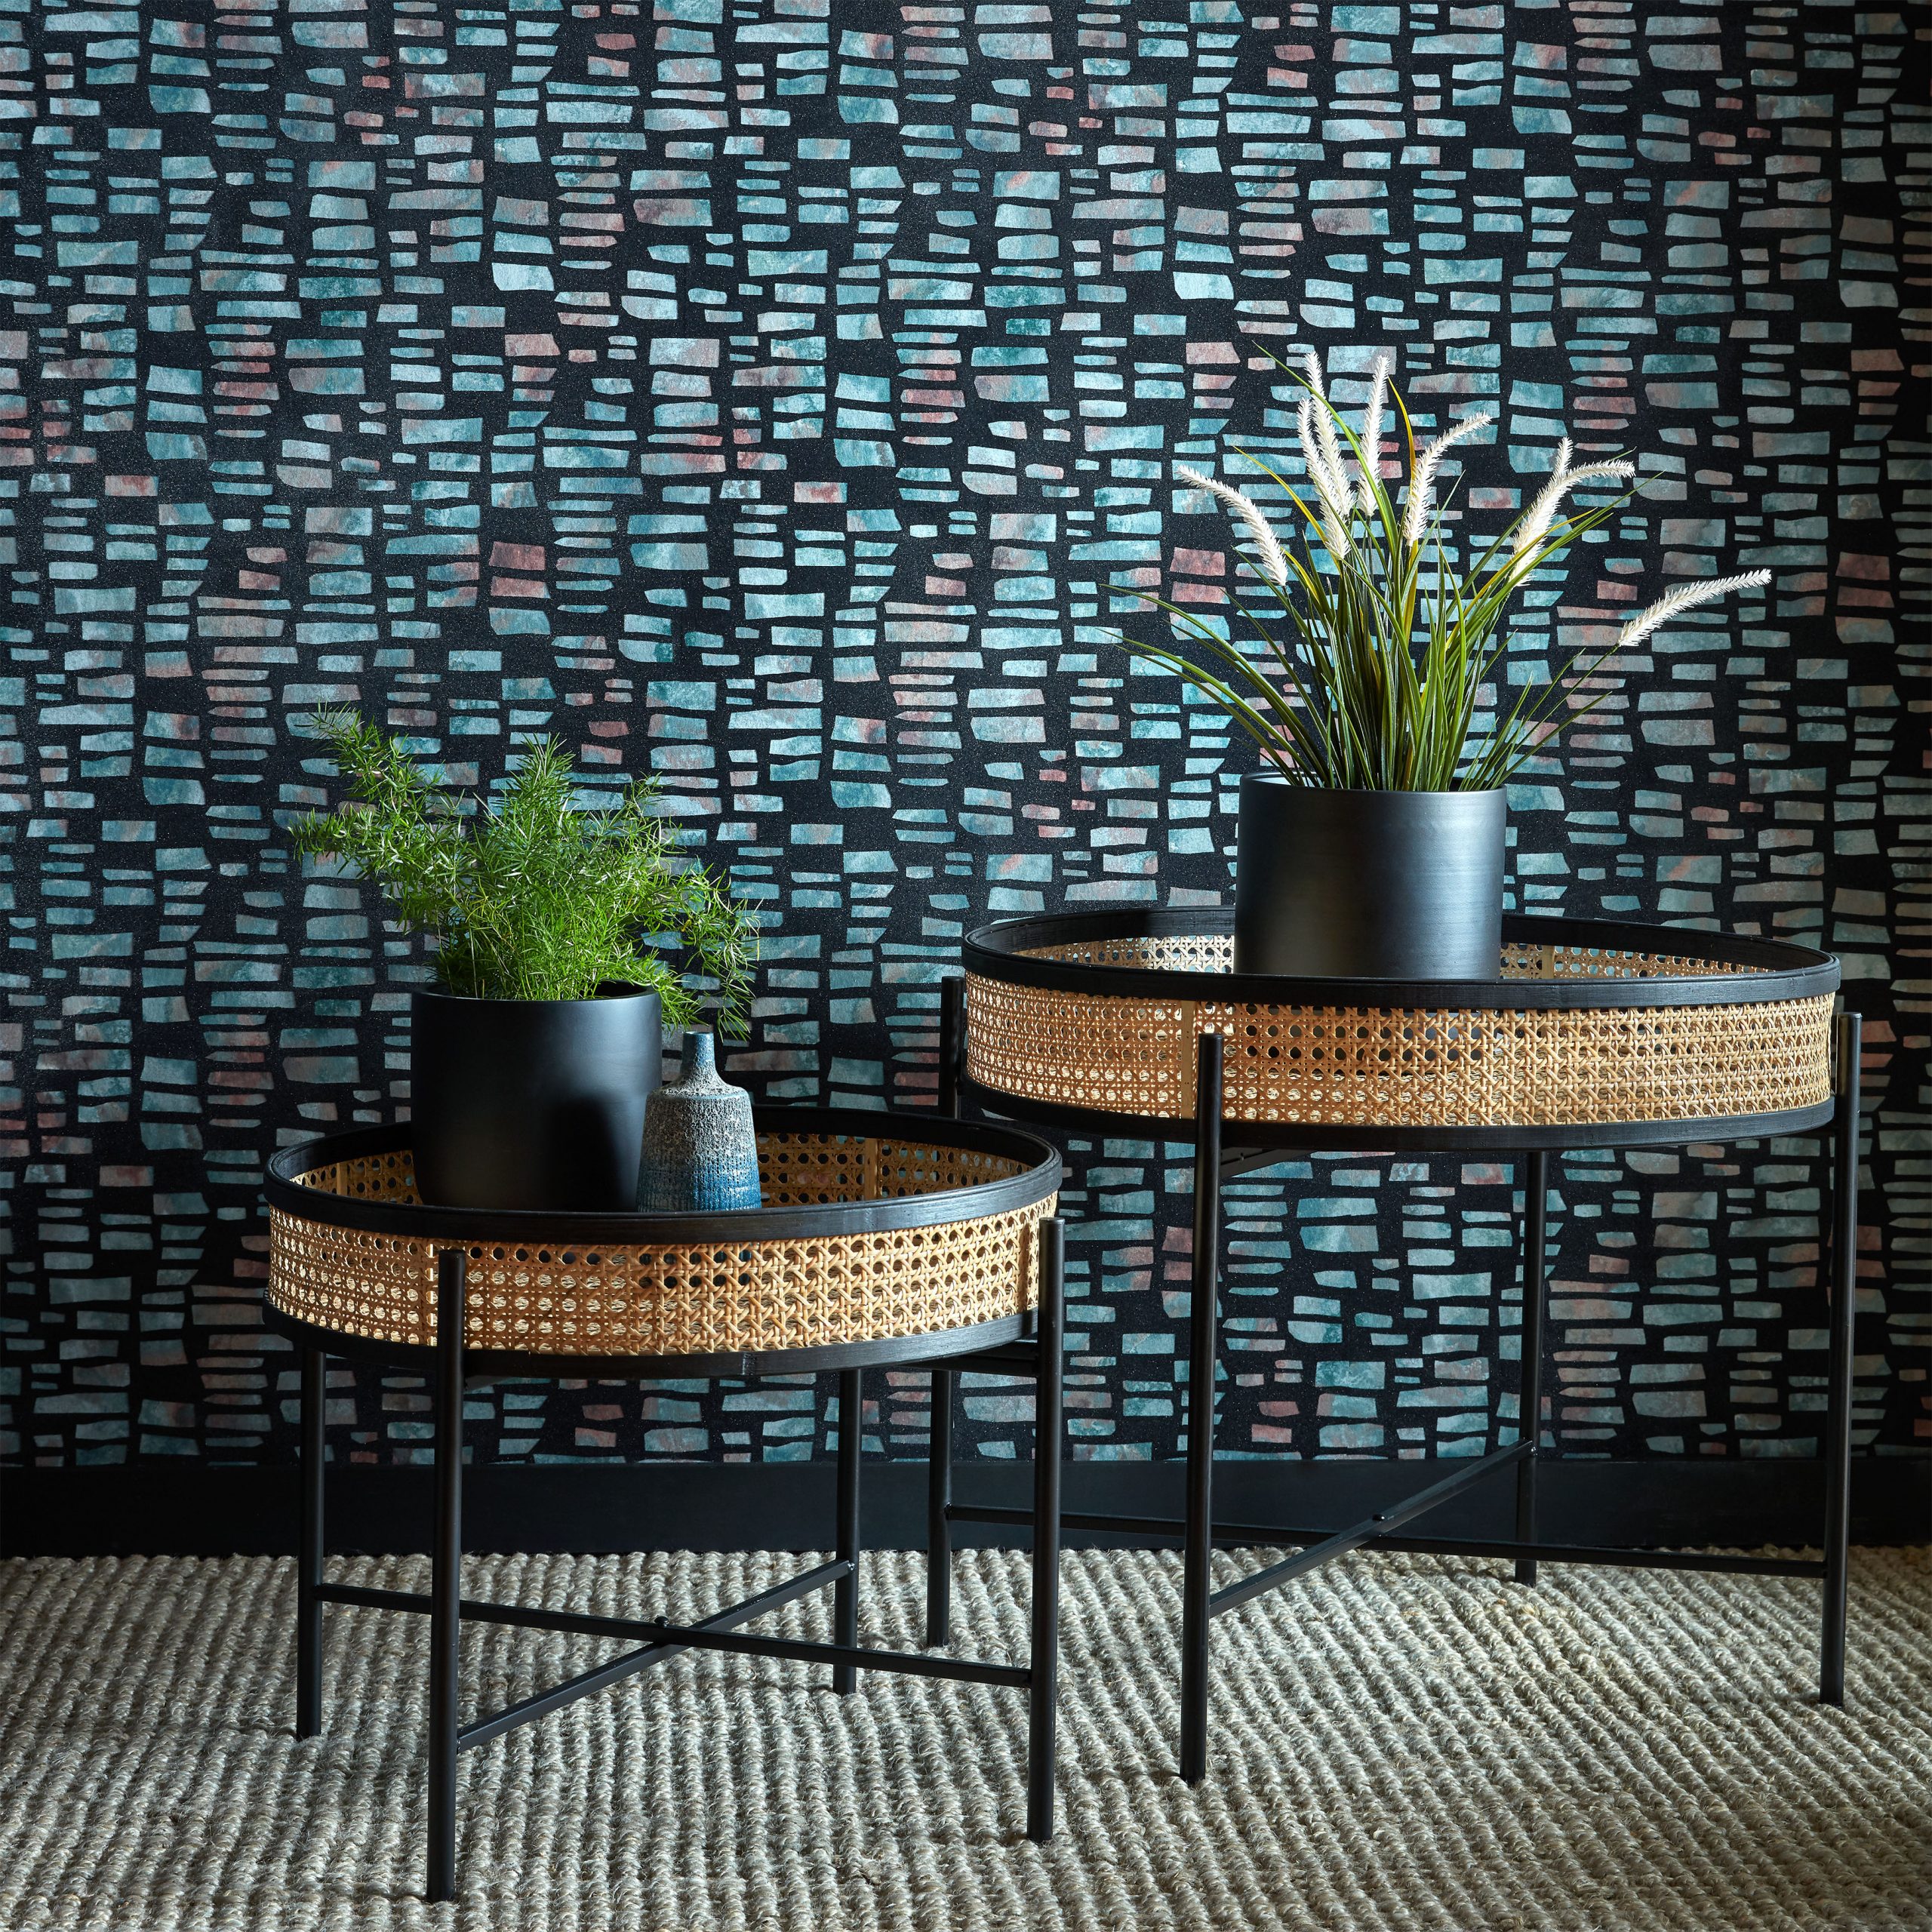 Tapet Fusion, Mineral Black Luxury Flock, 1838 Wallcoverings, 5.3mp / rola 1838 Wallcoverings